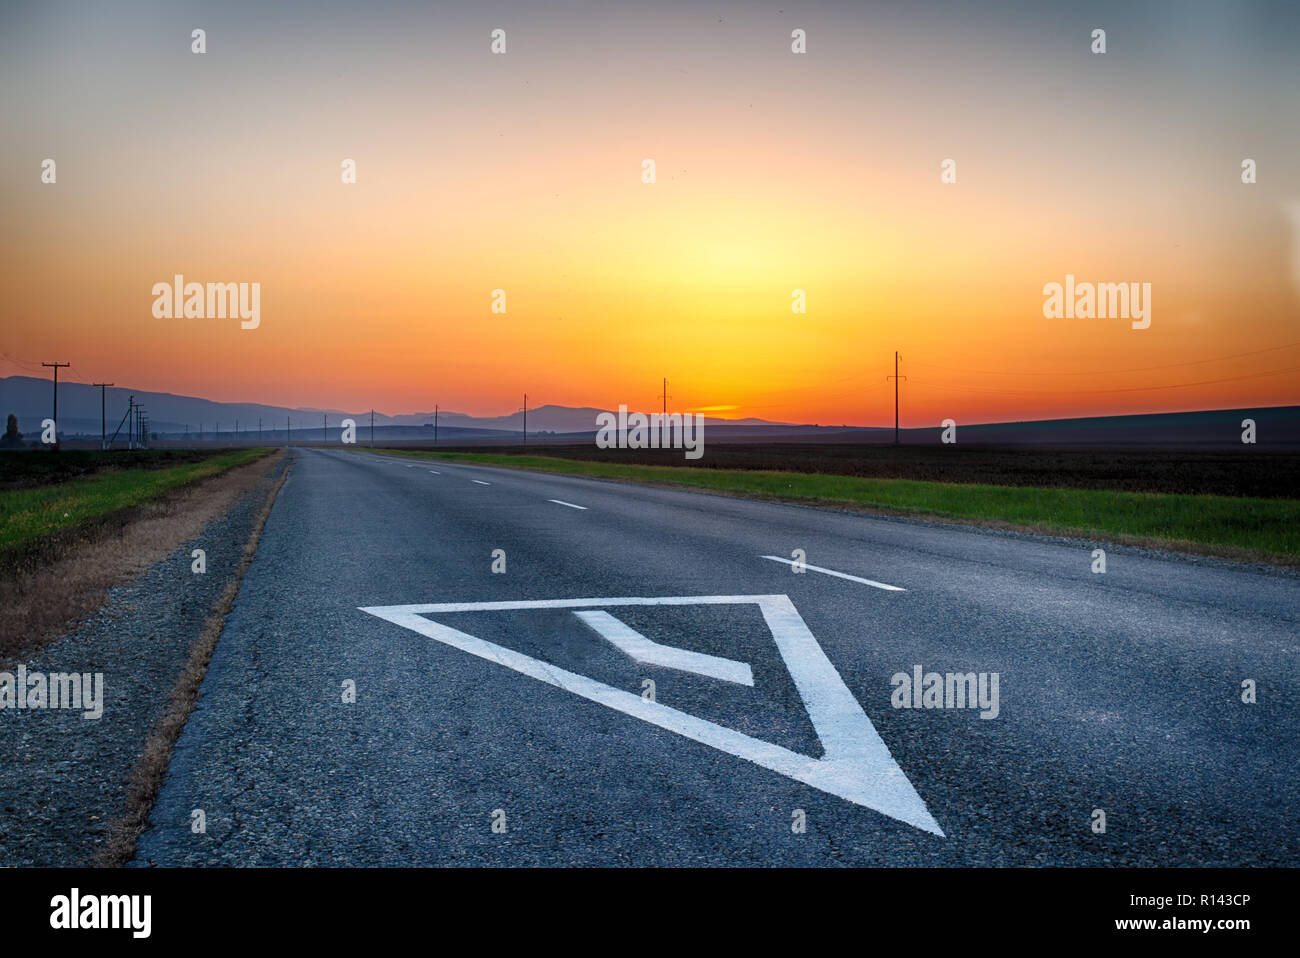 Mountain road. The curve of the road at sunset. Asphalt coating. Bright horizon. Stock Photo